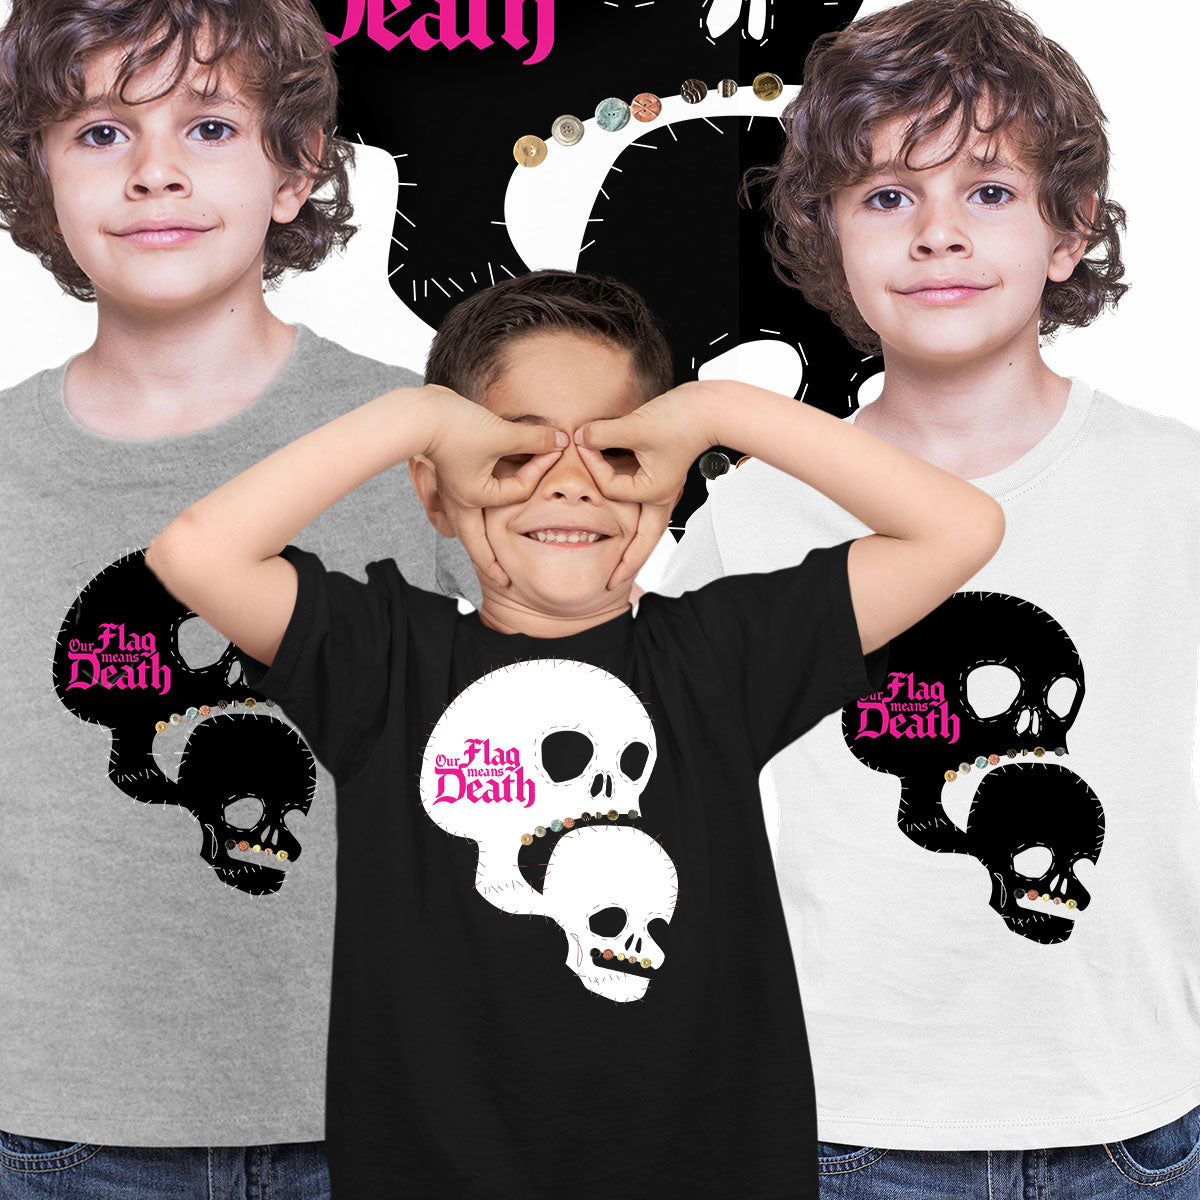 Our Flag Means Death t-shirt Skull Pirate TV movie series Kids Gift T-shirt - Kuzi Tees